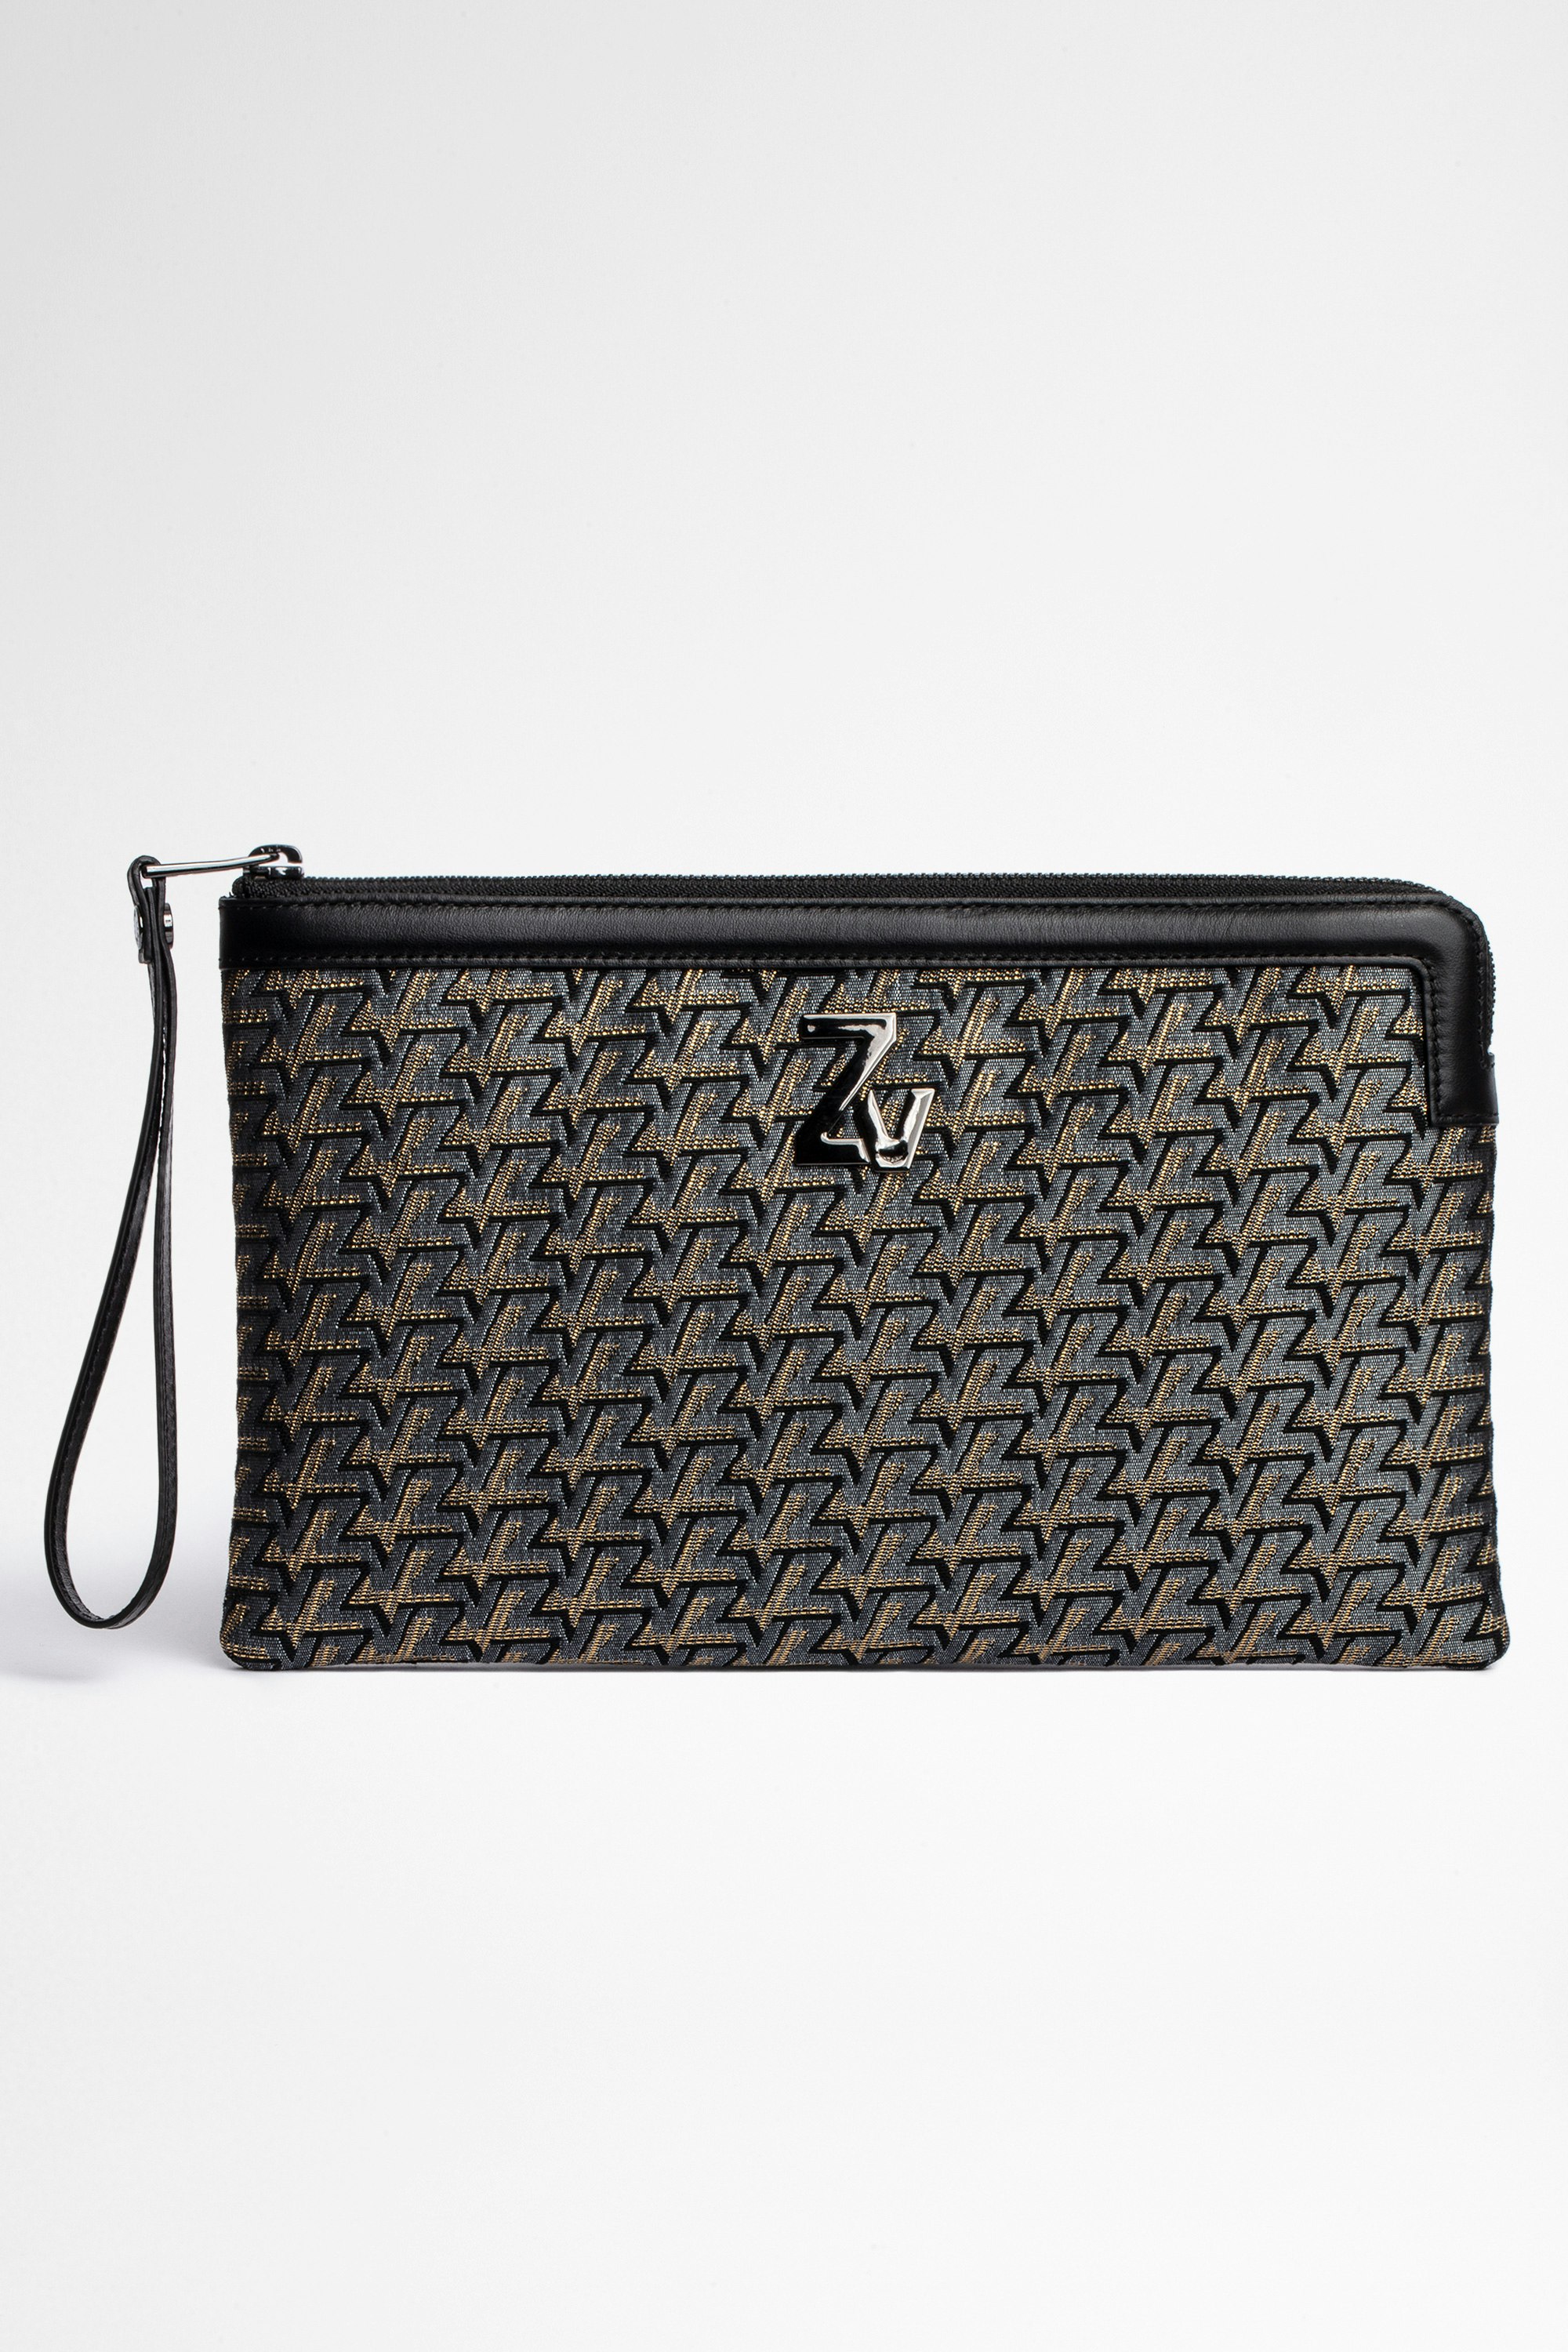 ZV Initiale La Pouch Clutch Women's clutch in leather and ZV street jacquard canvas